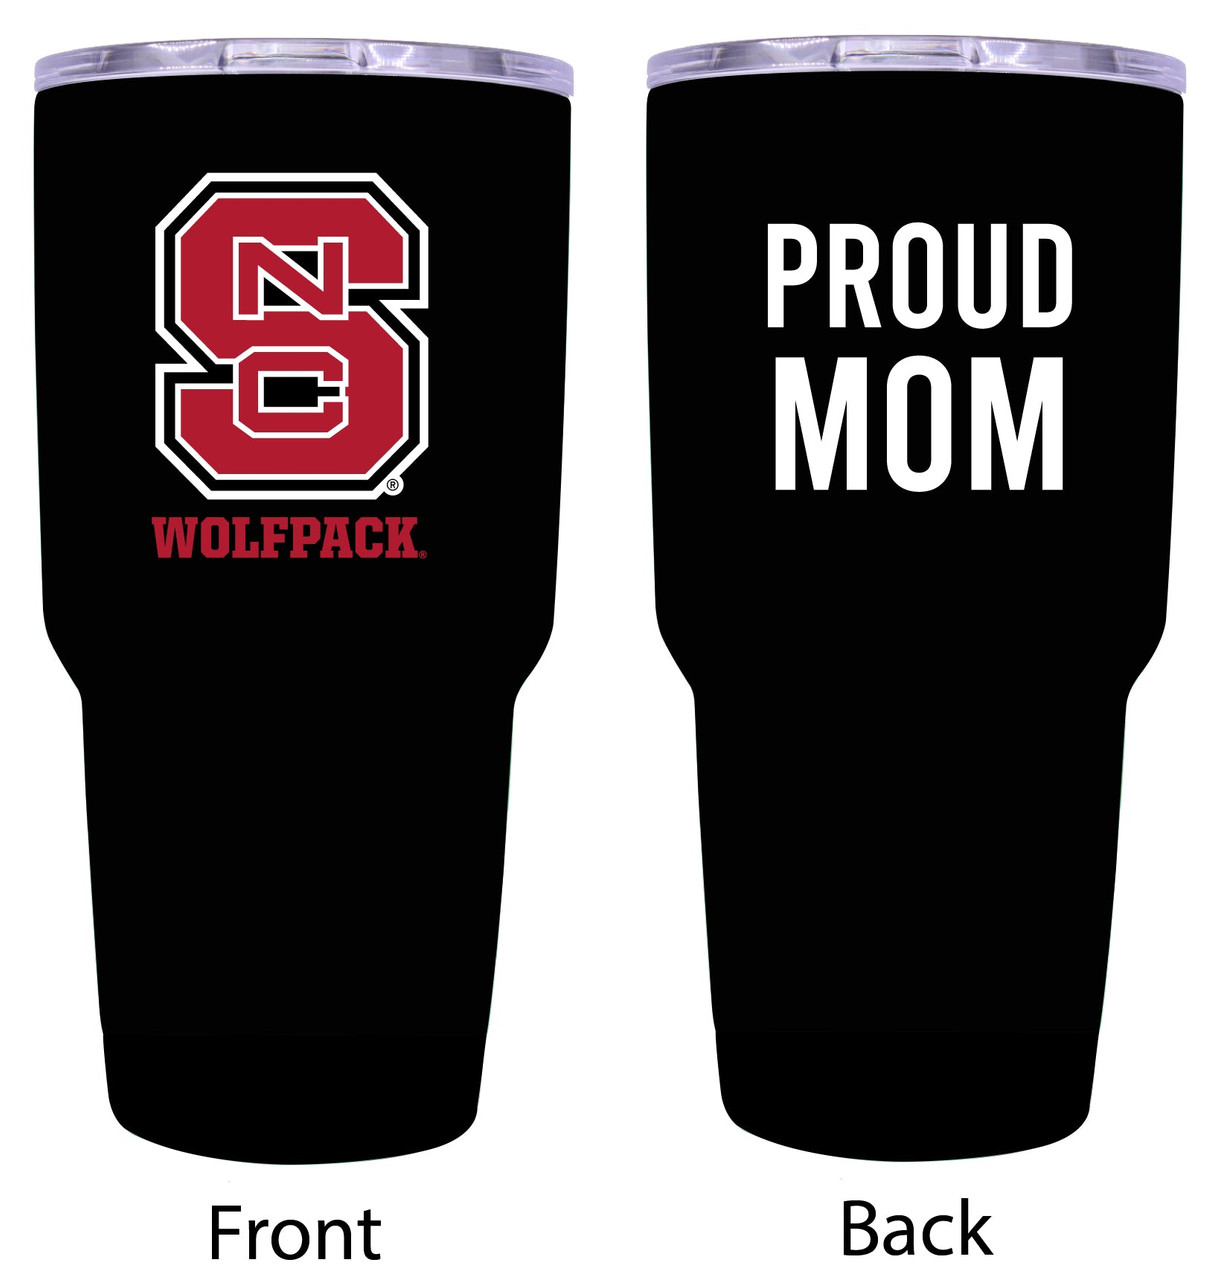 NC State Wolfpack Proud Mom 24 oz Insulated Stainless Steel Tumblers Choose Your Color.